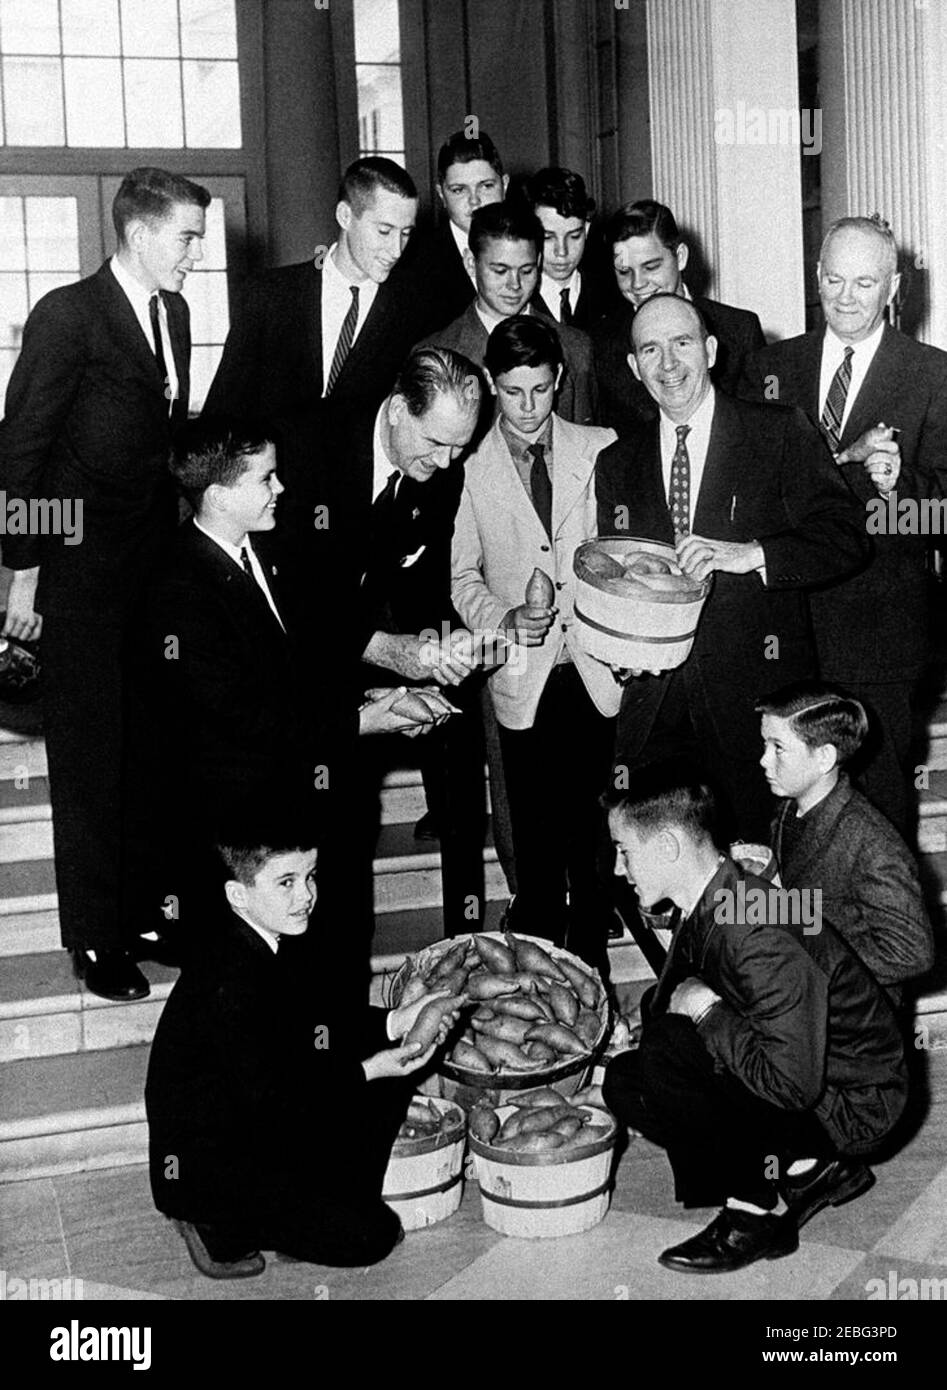 A 4-H Club visits the White House. Special Assistant to the President Dave Powers (holding basket) poses with Senator Olin Johnston of South Carolina (bending over); the champion 4-H Club sweet potato growers for the State of South Carolina for 1960; and their gift of sweet potatoes at the White House, Washington, D. C. 4-H Club members include: Dan Bates; Gene Ousley; Junior Boykin; Mack Ousley; Dwight Lee; Kenneth Cooper; Paul Linwood Shuler; Carson Blackwell; Donald Bagnall; Henry David Gunter; Ernest Boykin. The man right of Dave Powers is unidentified.rn Stock Photo